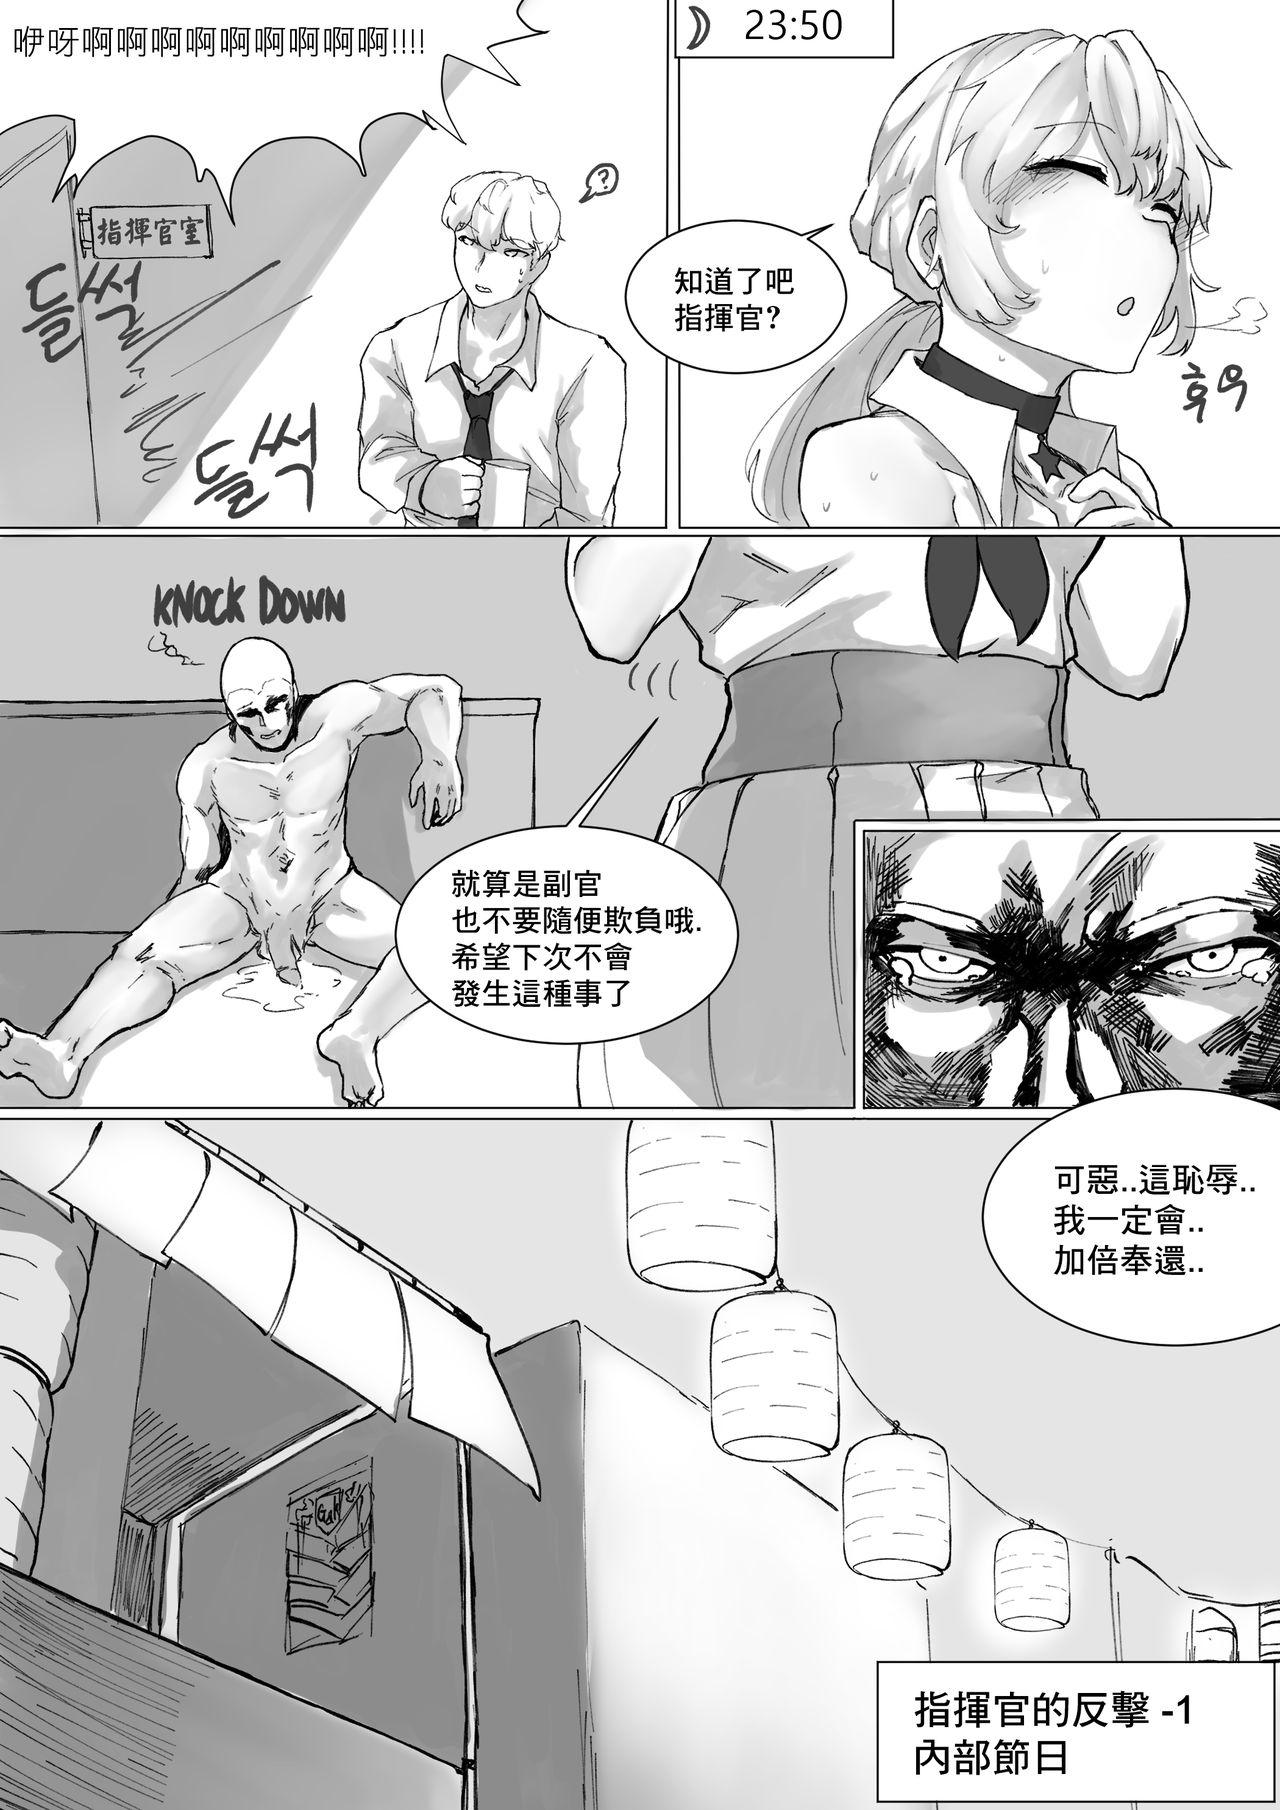 Nena How To Use OTS-14 - Girls frontline Milk - Page 9